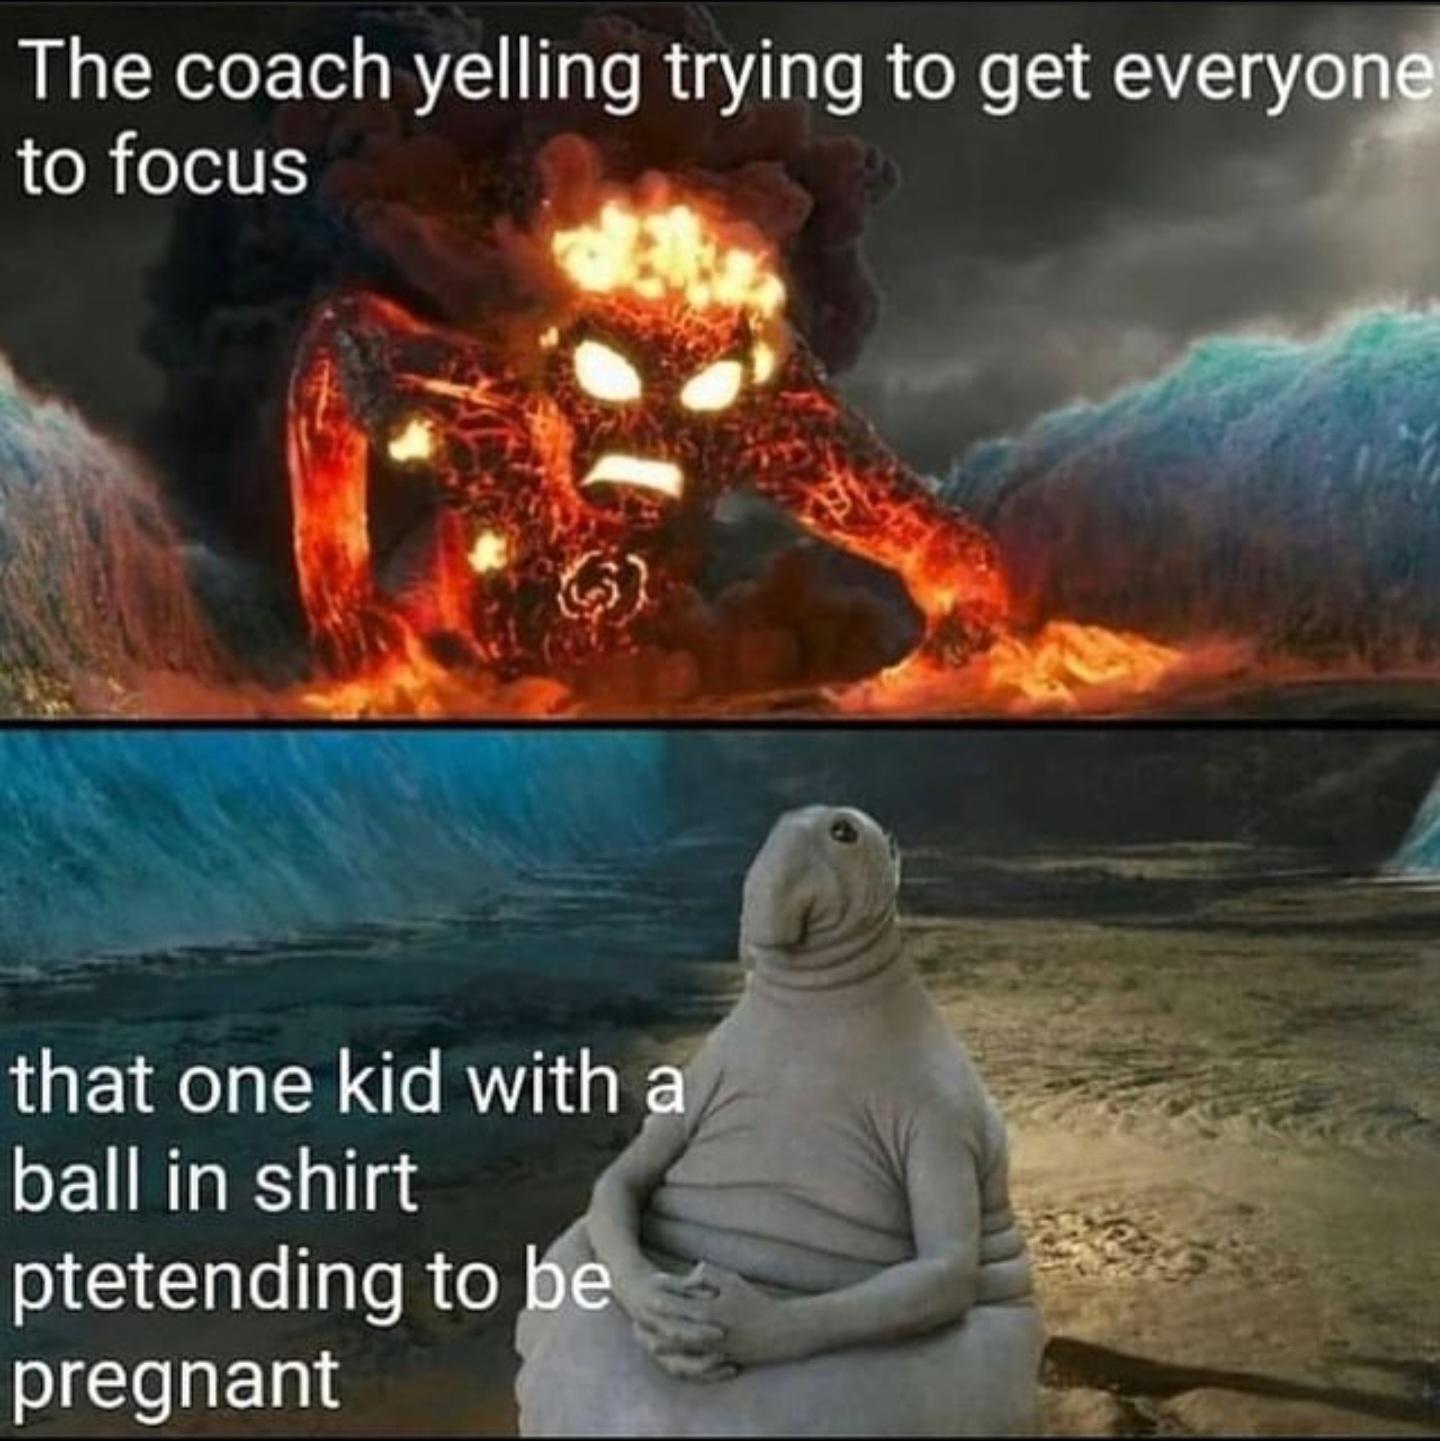 funny memes - dank memes - me making potions meme - The coach yelling trying to get everyone to focus that one kid with a ball in shirt ptetending to be pregnant